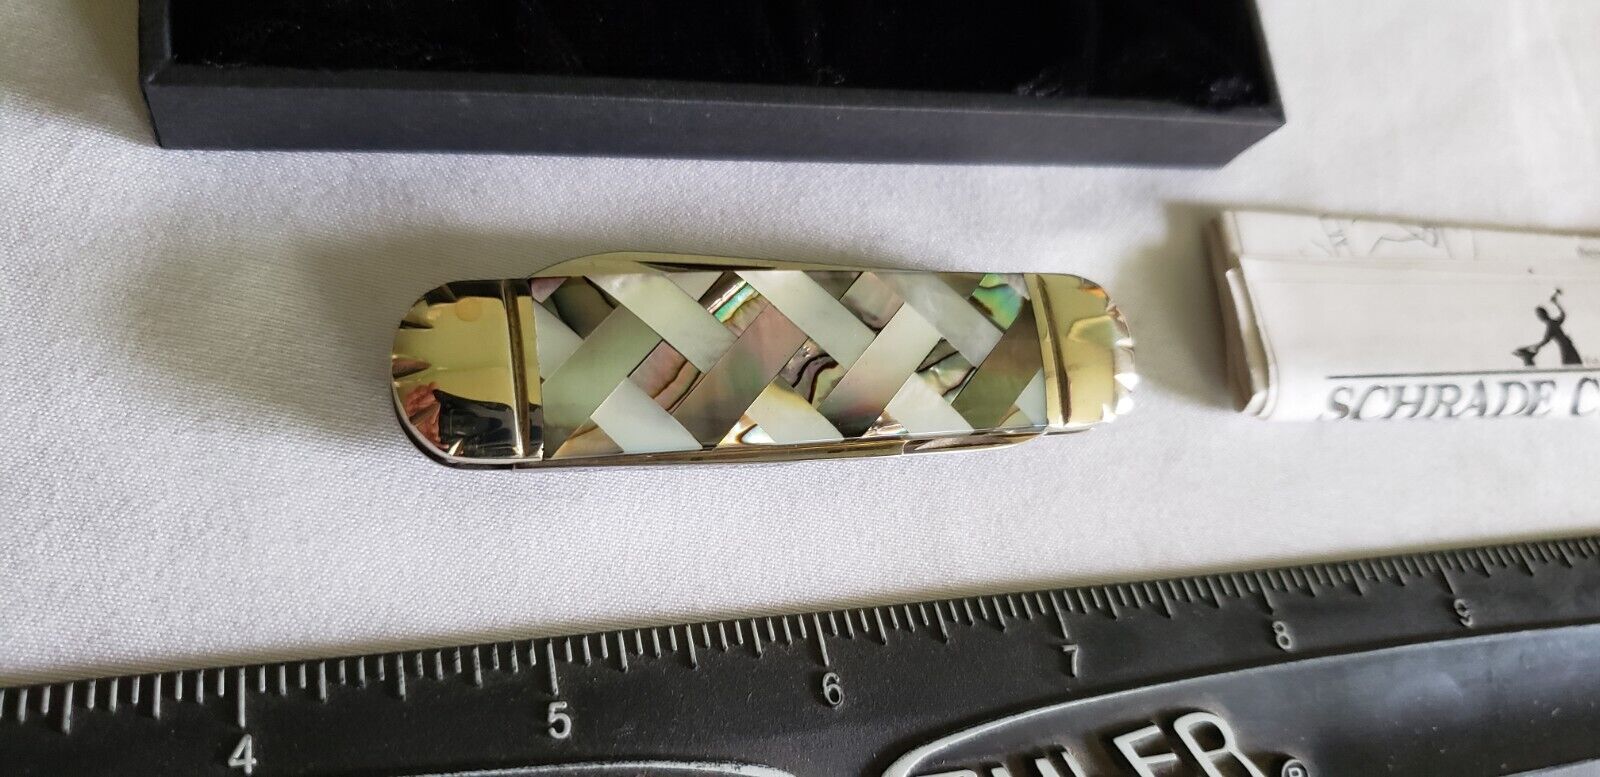 SCHRADE CLASSIC RARE UNCLE HENRY KNIFE MONEY CLIP TOOL ABALONE PEARL CRISS CROSS